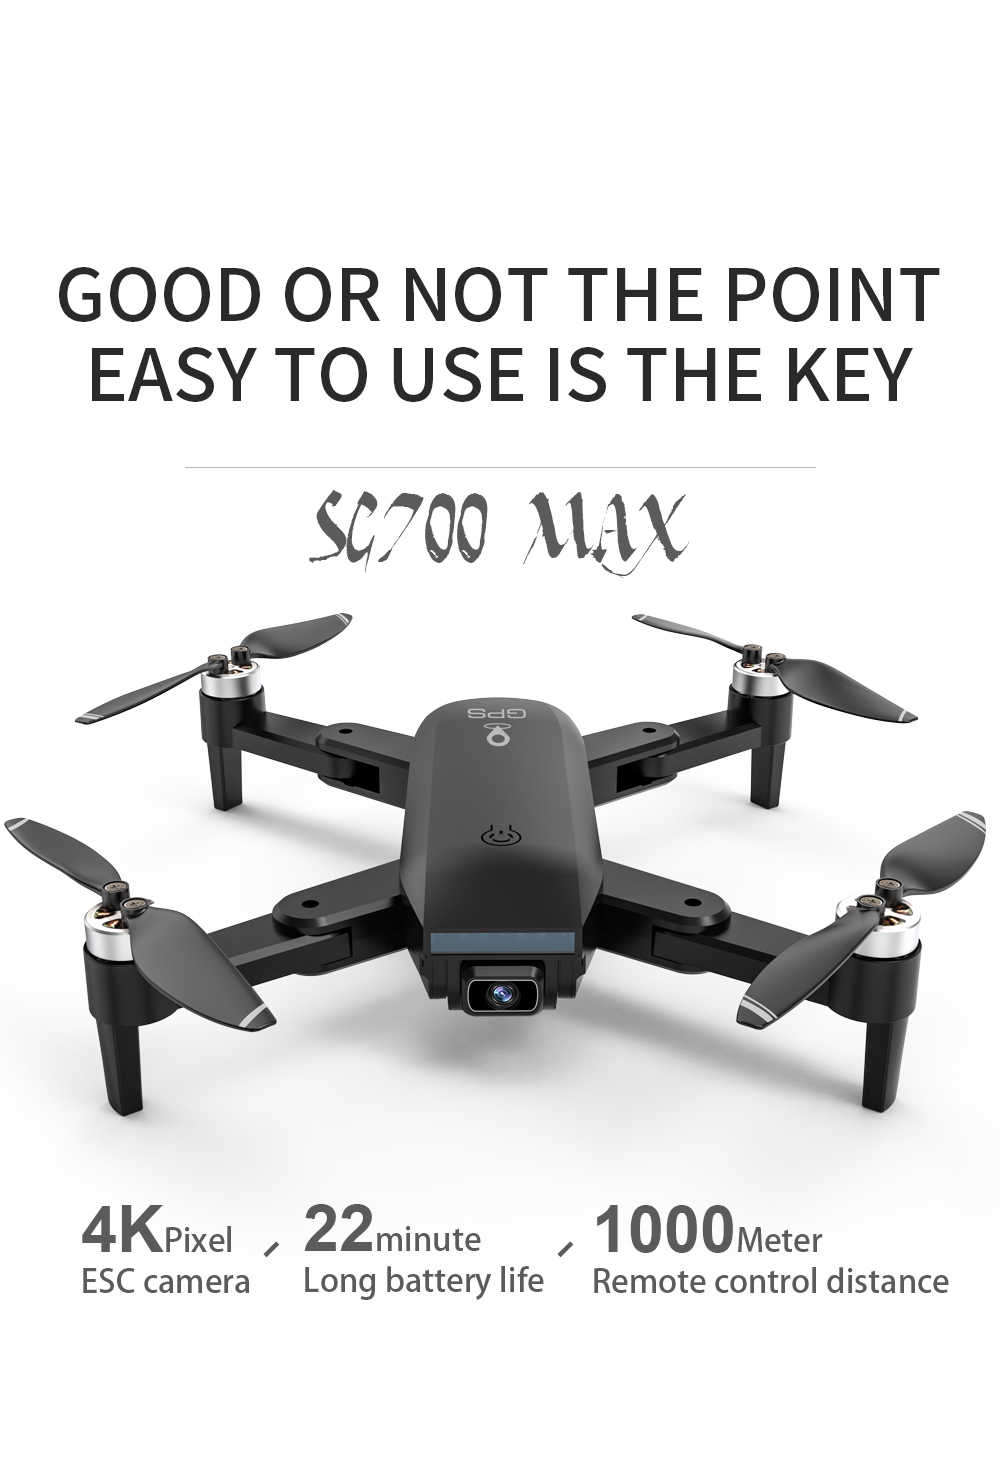 ZLL-SG700-MAX-5G-WIFI-FPV-GPS-with-4K-HD-Dual-Camera-22mins-Flight-Time-Optical-Flow-Positioning-Bru-1853047-6